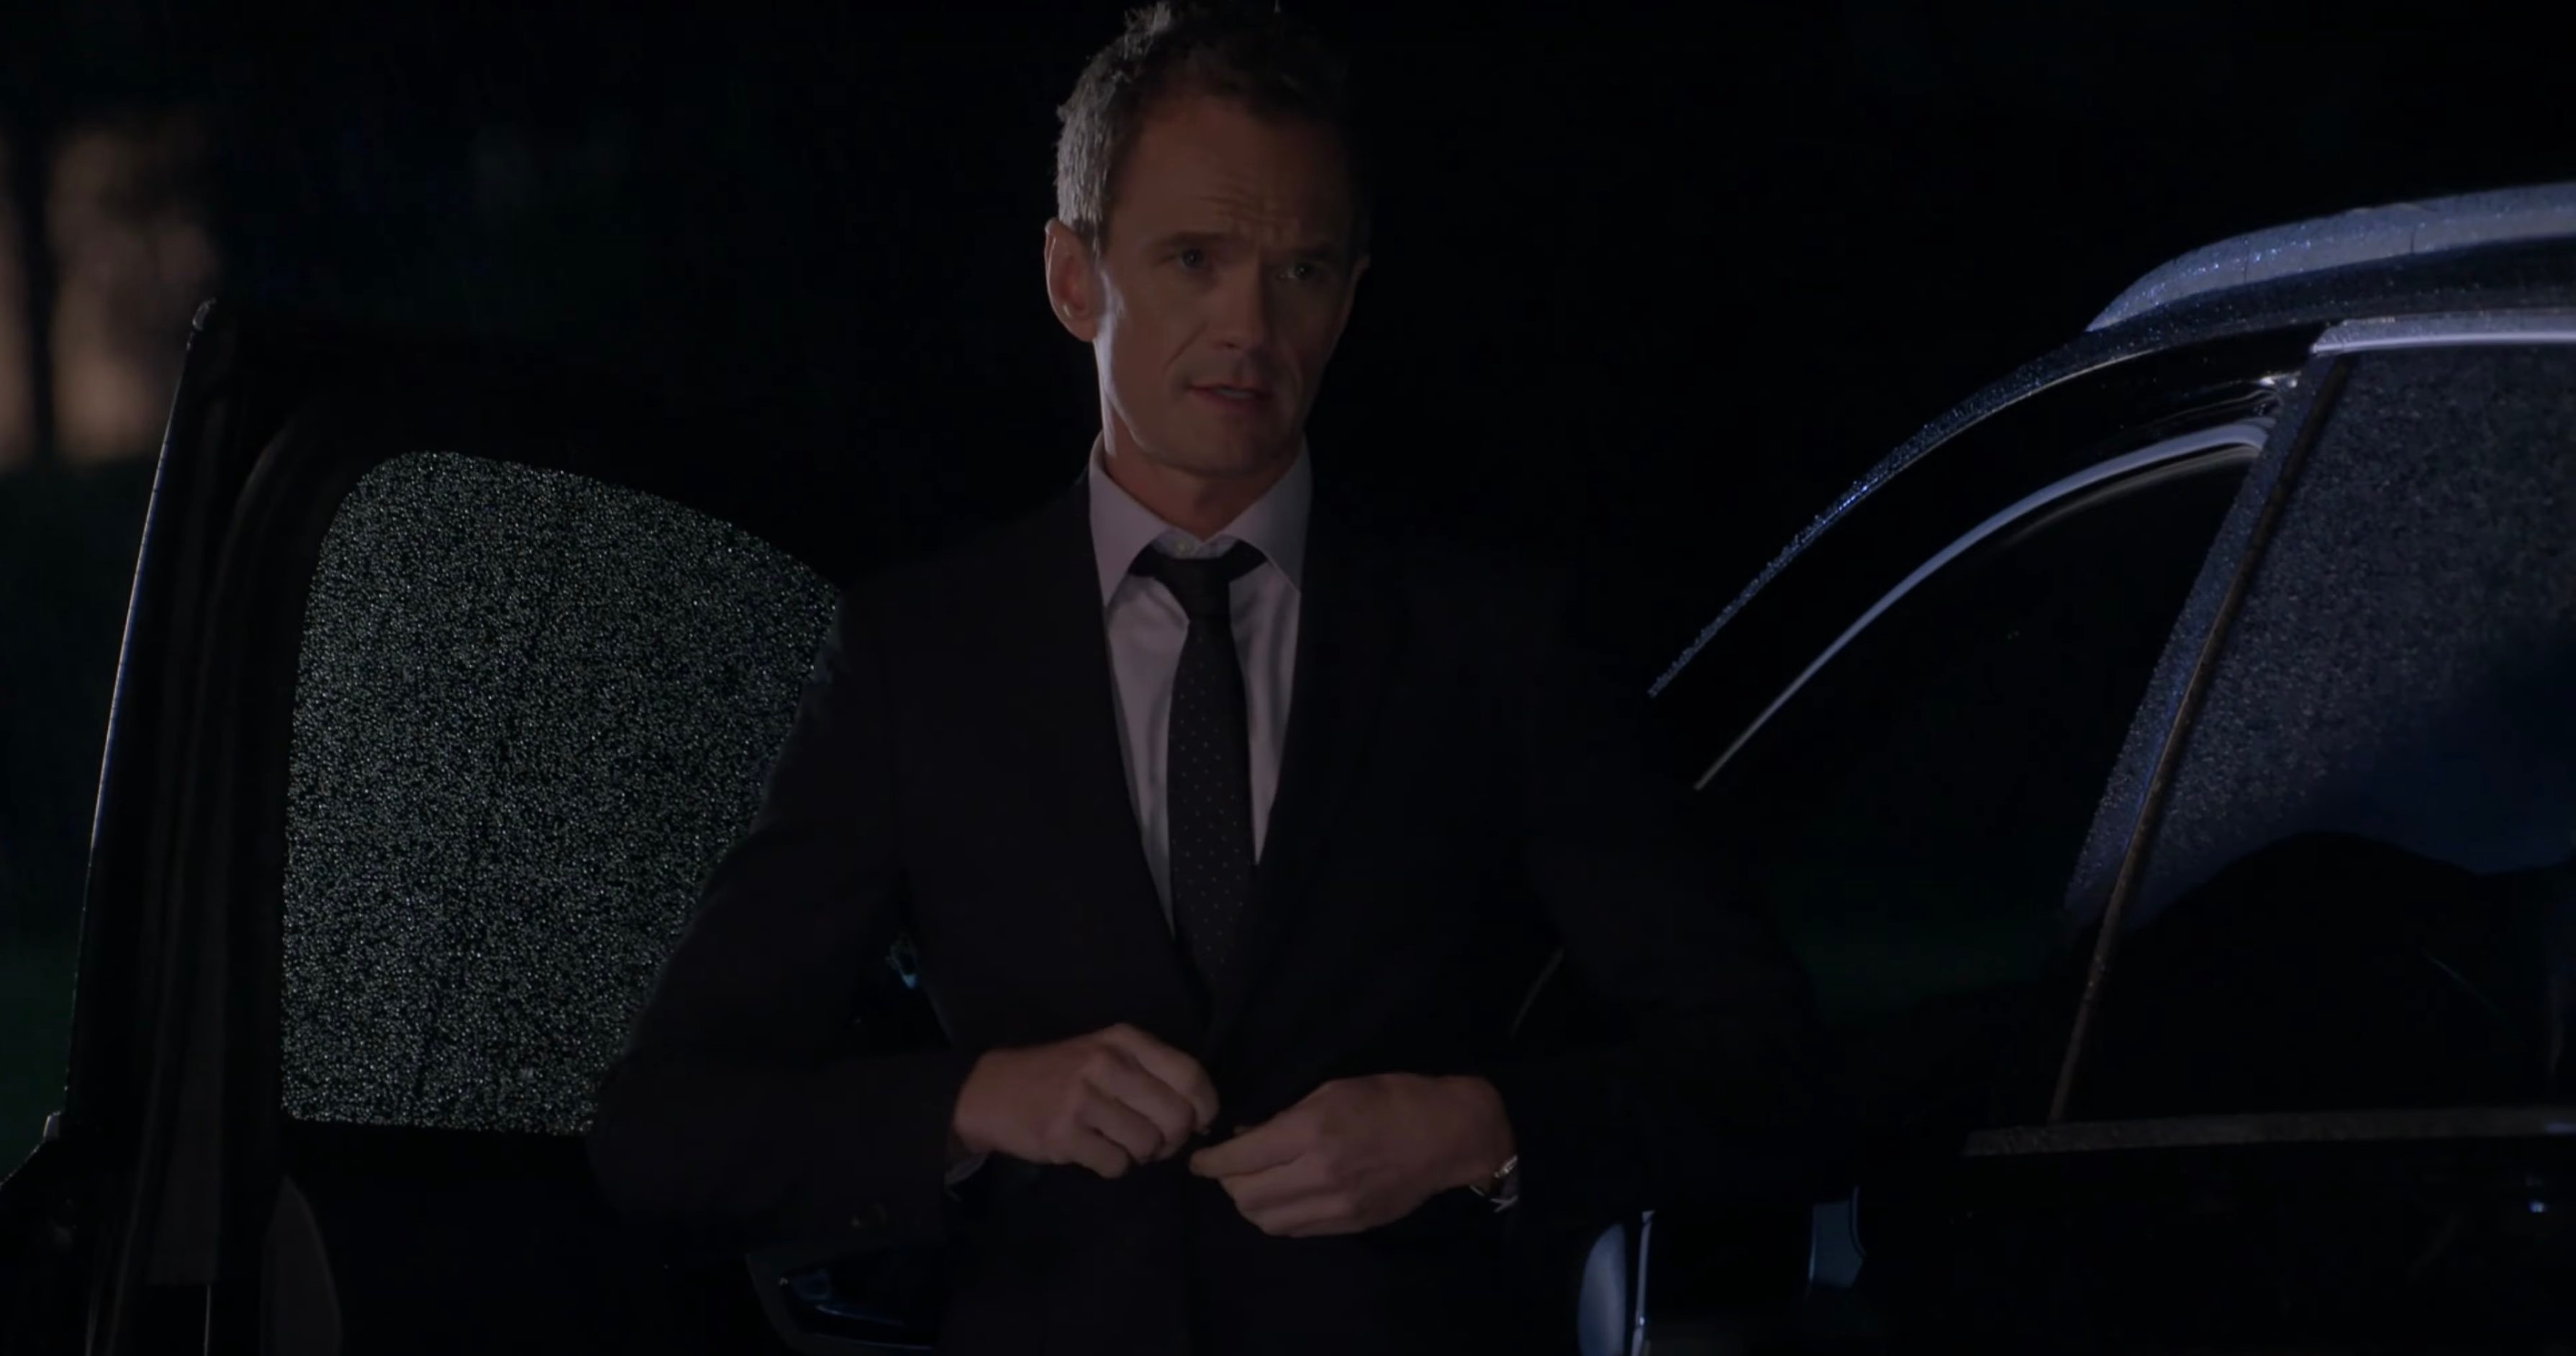 Neil Patrick Harris to Return as Barney Stinson in 'How I Met Your Mother' Spin-Off Series